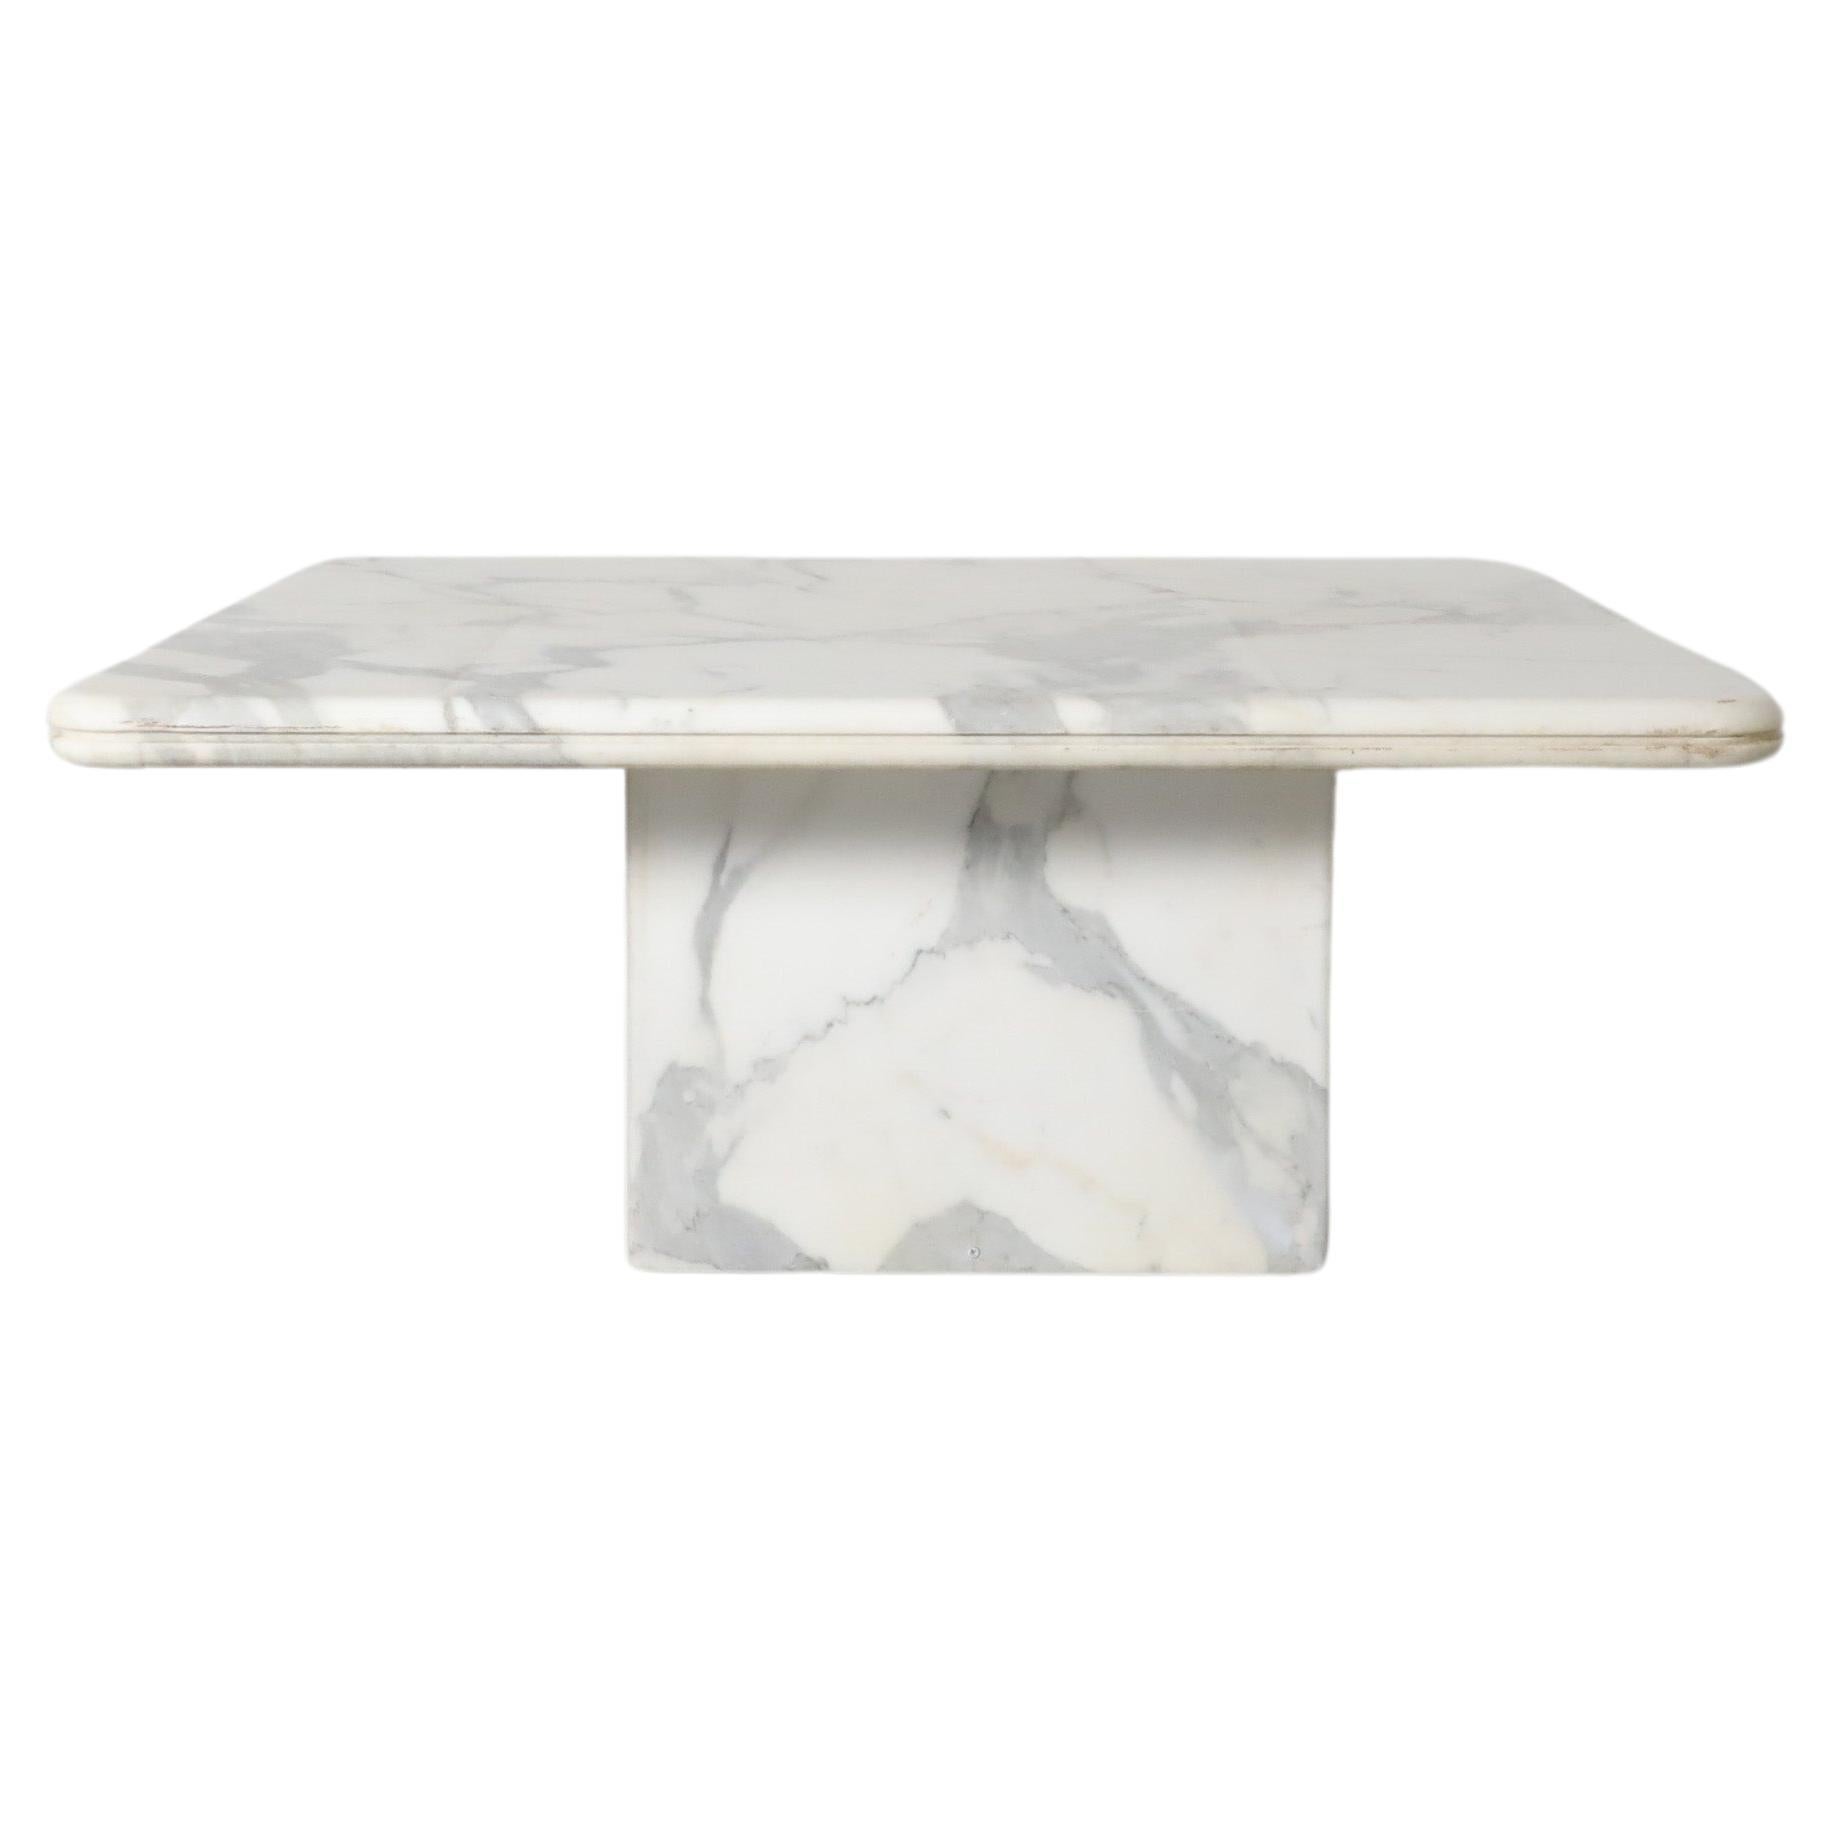 Angelo Mangiarotti Style Modernist Marble Coffee or Side Table